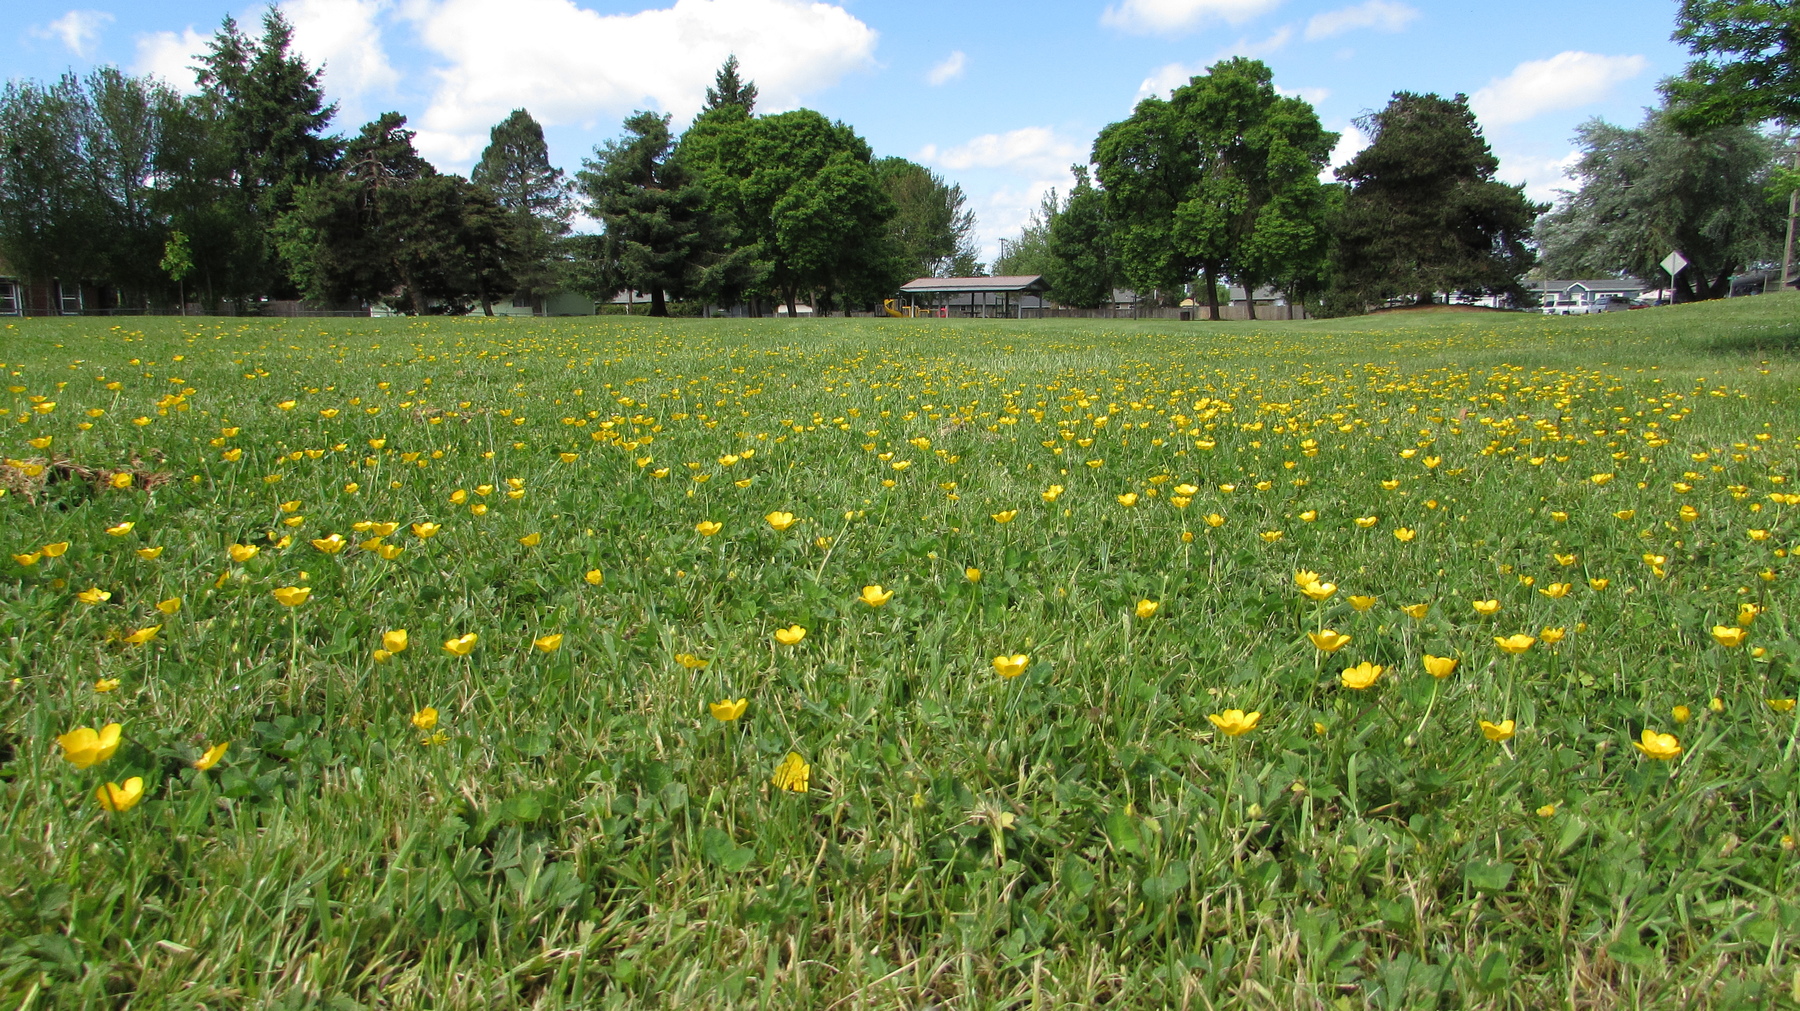 A field of grassy and yellow flowers at Tyson Park